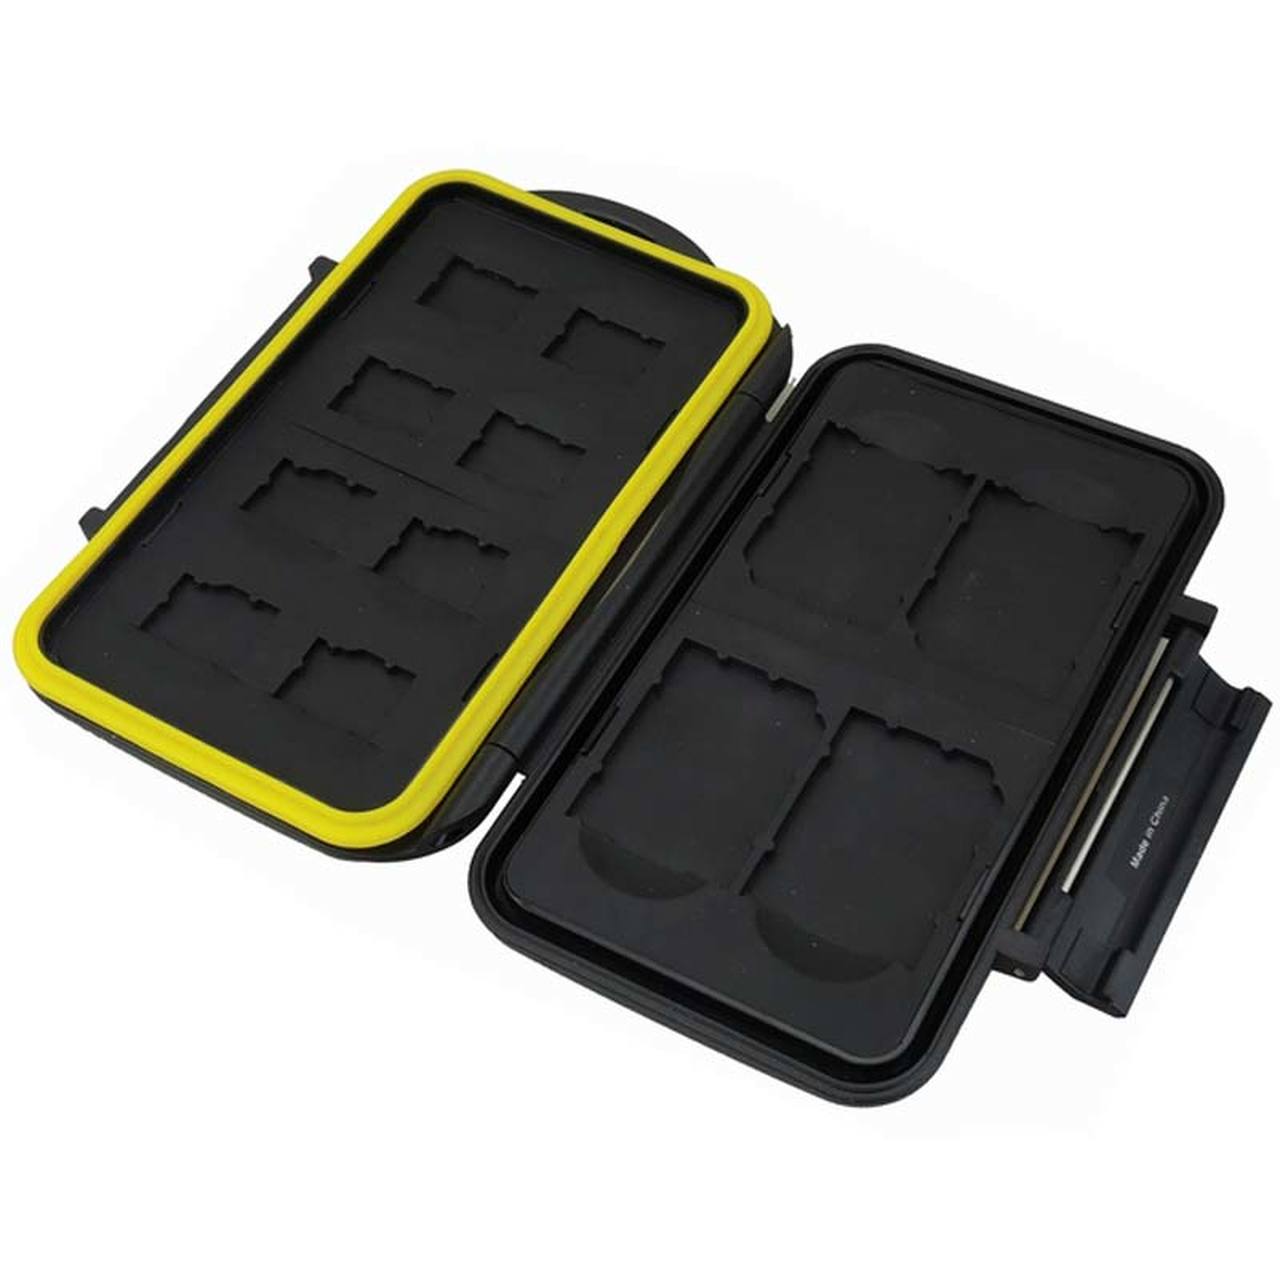 Promaster 8345 Extreme SD/MSD Card Case